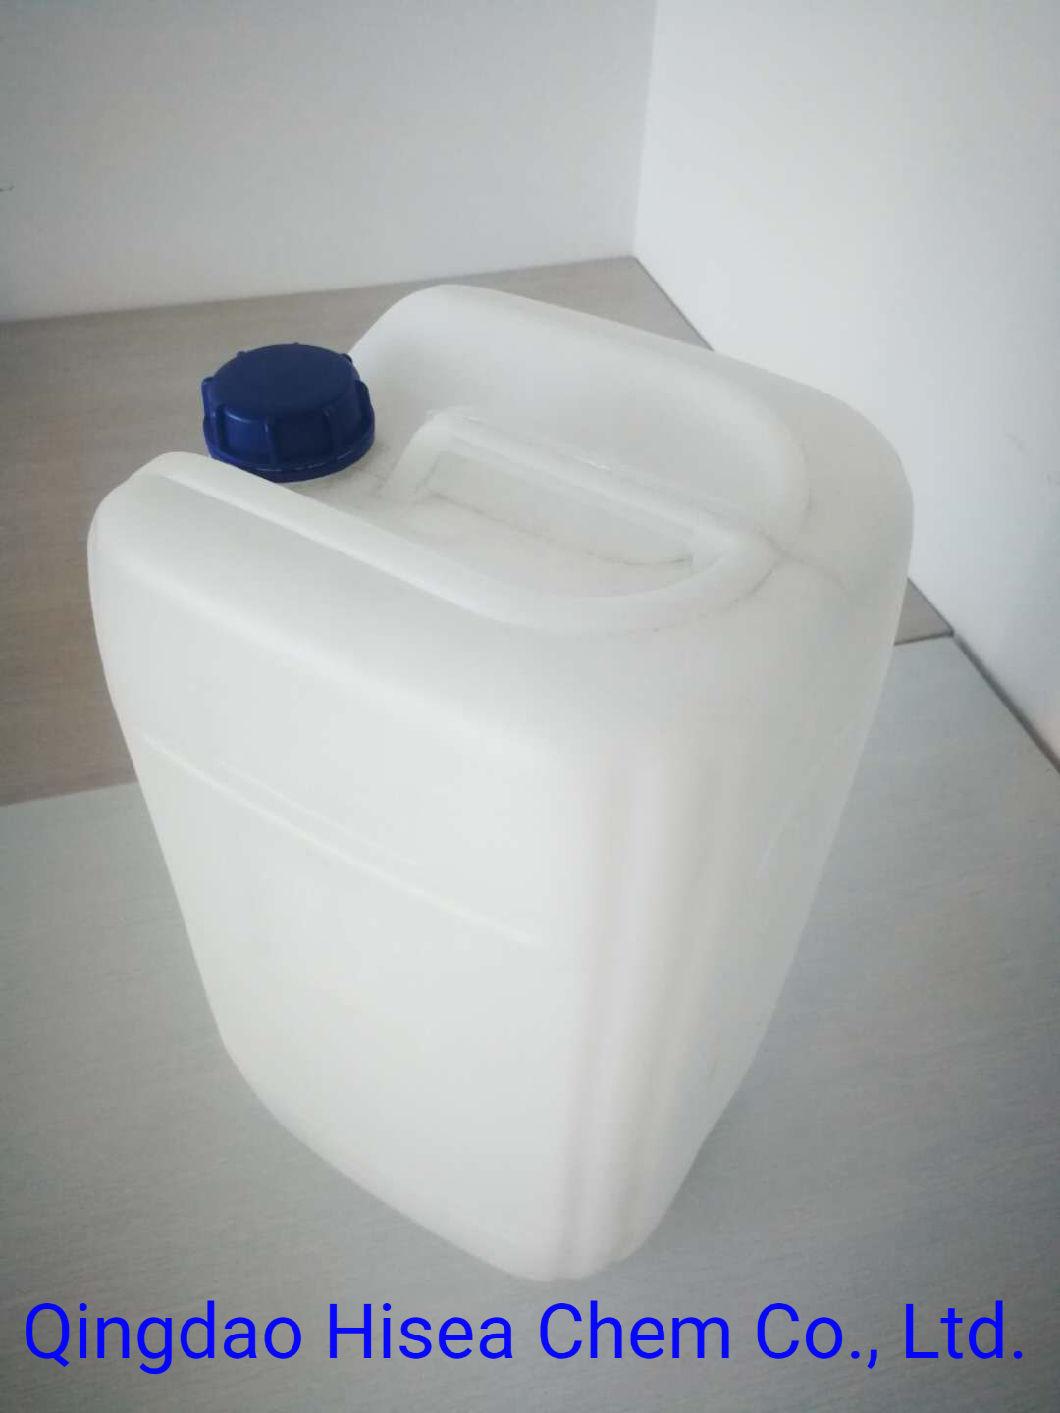 35kg Hydrogen Peroxide Plastic Drum for Chemical Packing